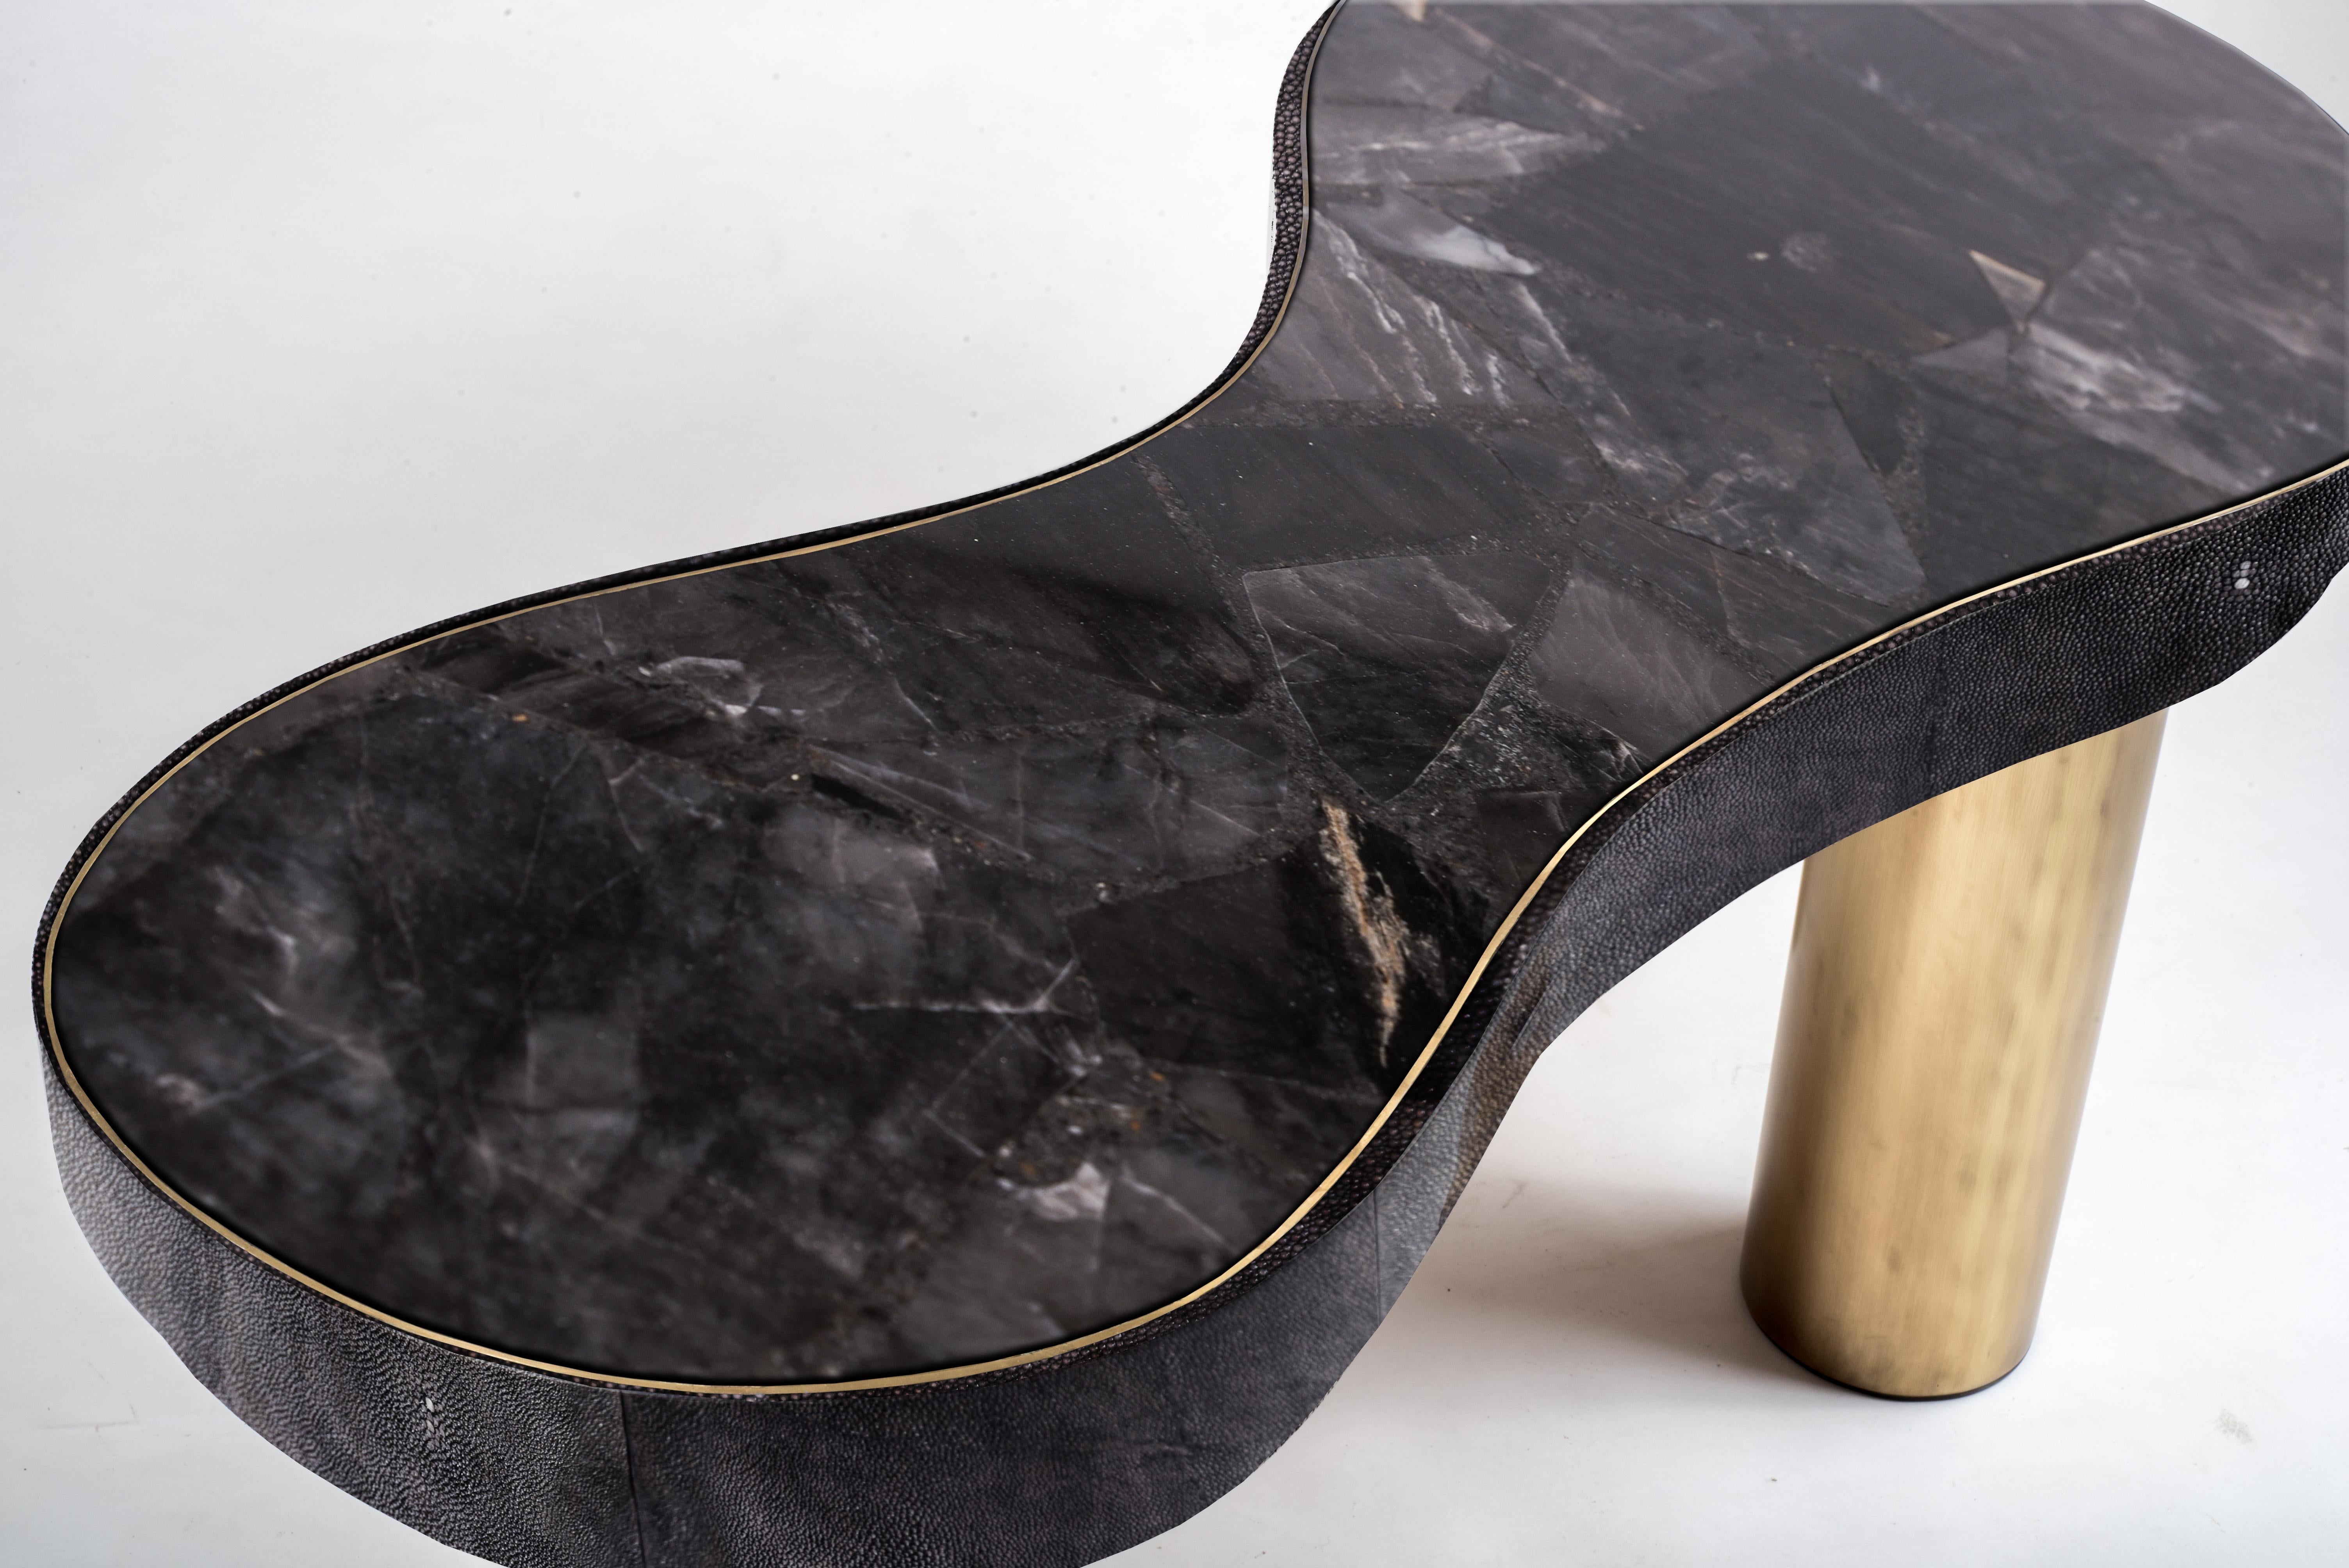 The constellation coffee table is whimsical and elegant with its galactic inspired shaped. This piece can also double as a bench. The top is inlaid in a beautiful Black Quartz semi-precious stone that has incredible tonalities in it and details. The